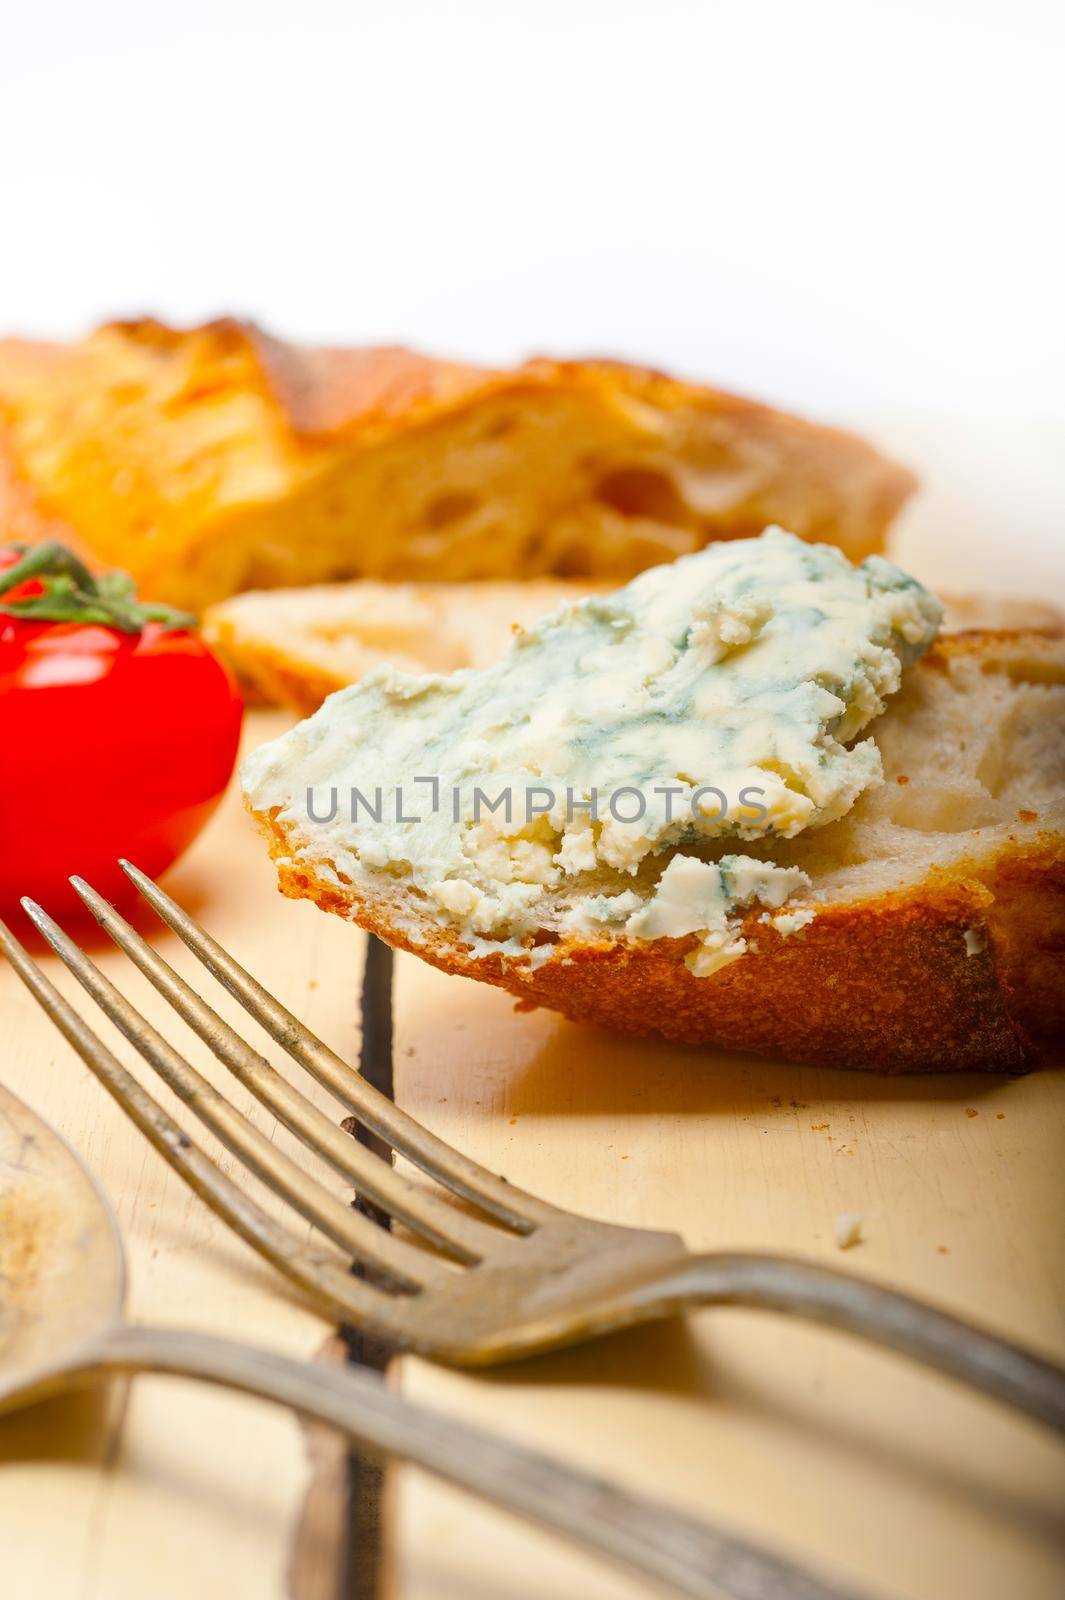 fresh blue cheese spread ove french baguette by keko64